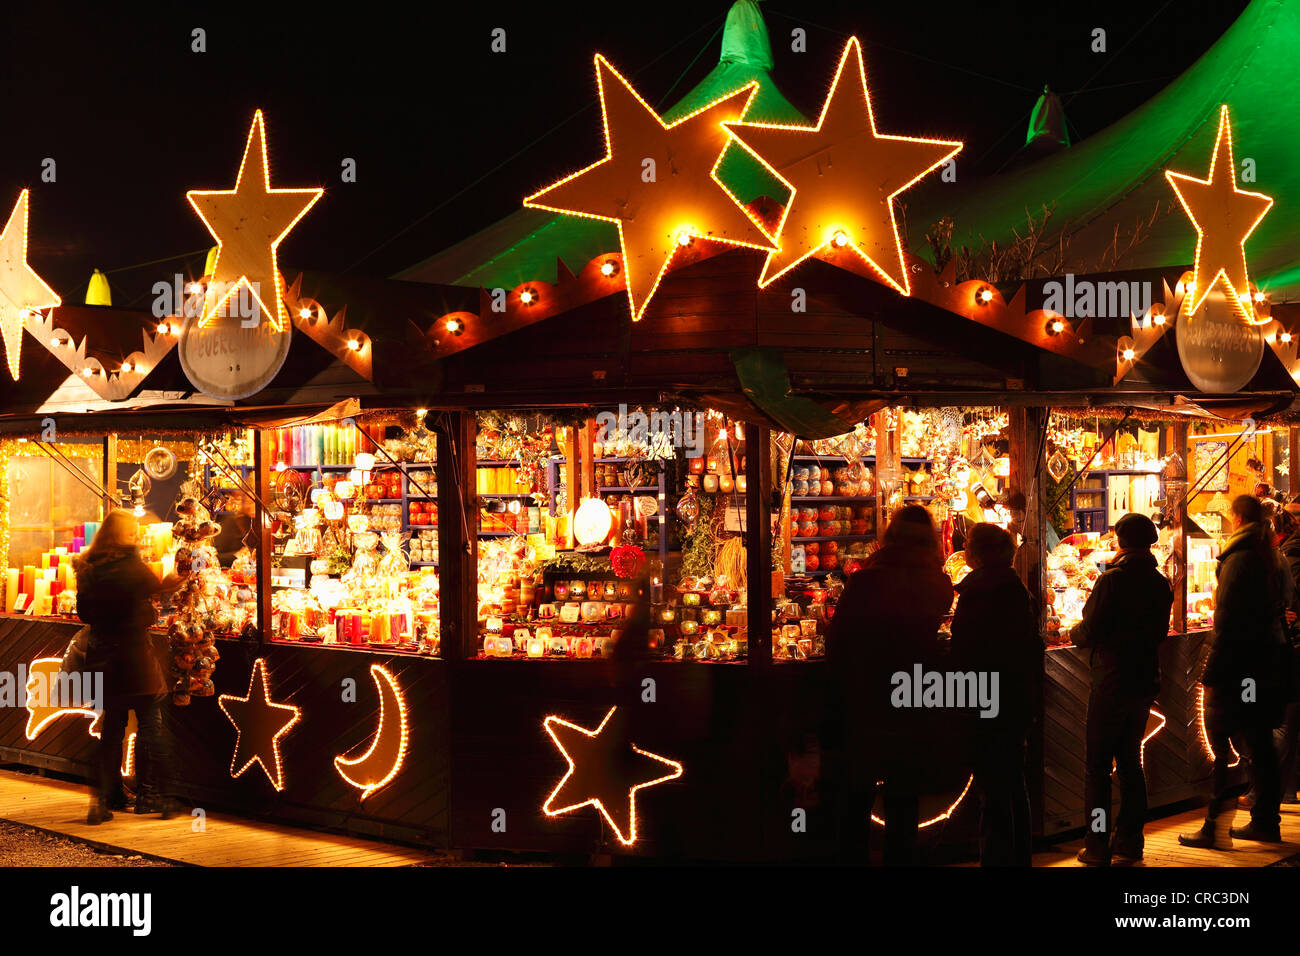 Festival d'hiver, Tollwood Theresienwiese, Munich, Bavaria, Germany, Europe Banque D'Images